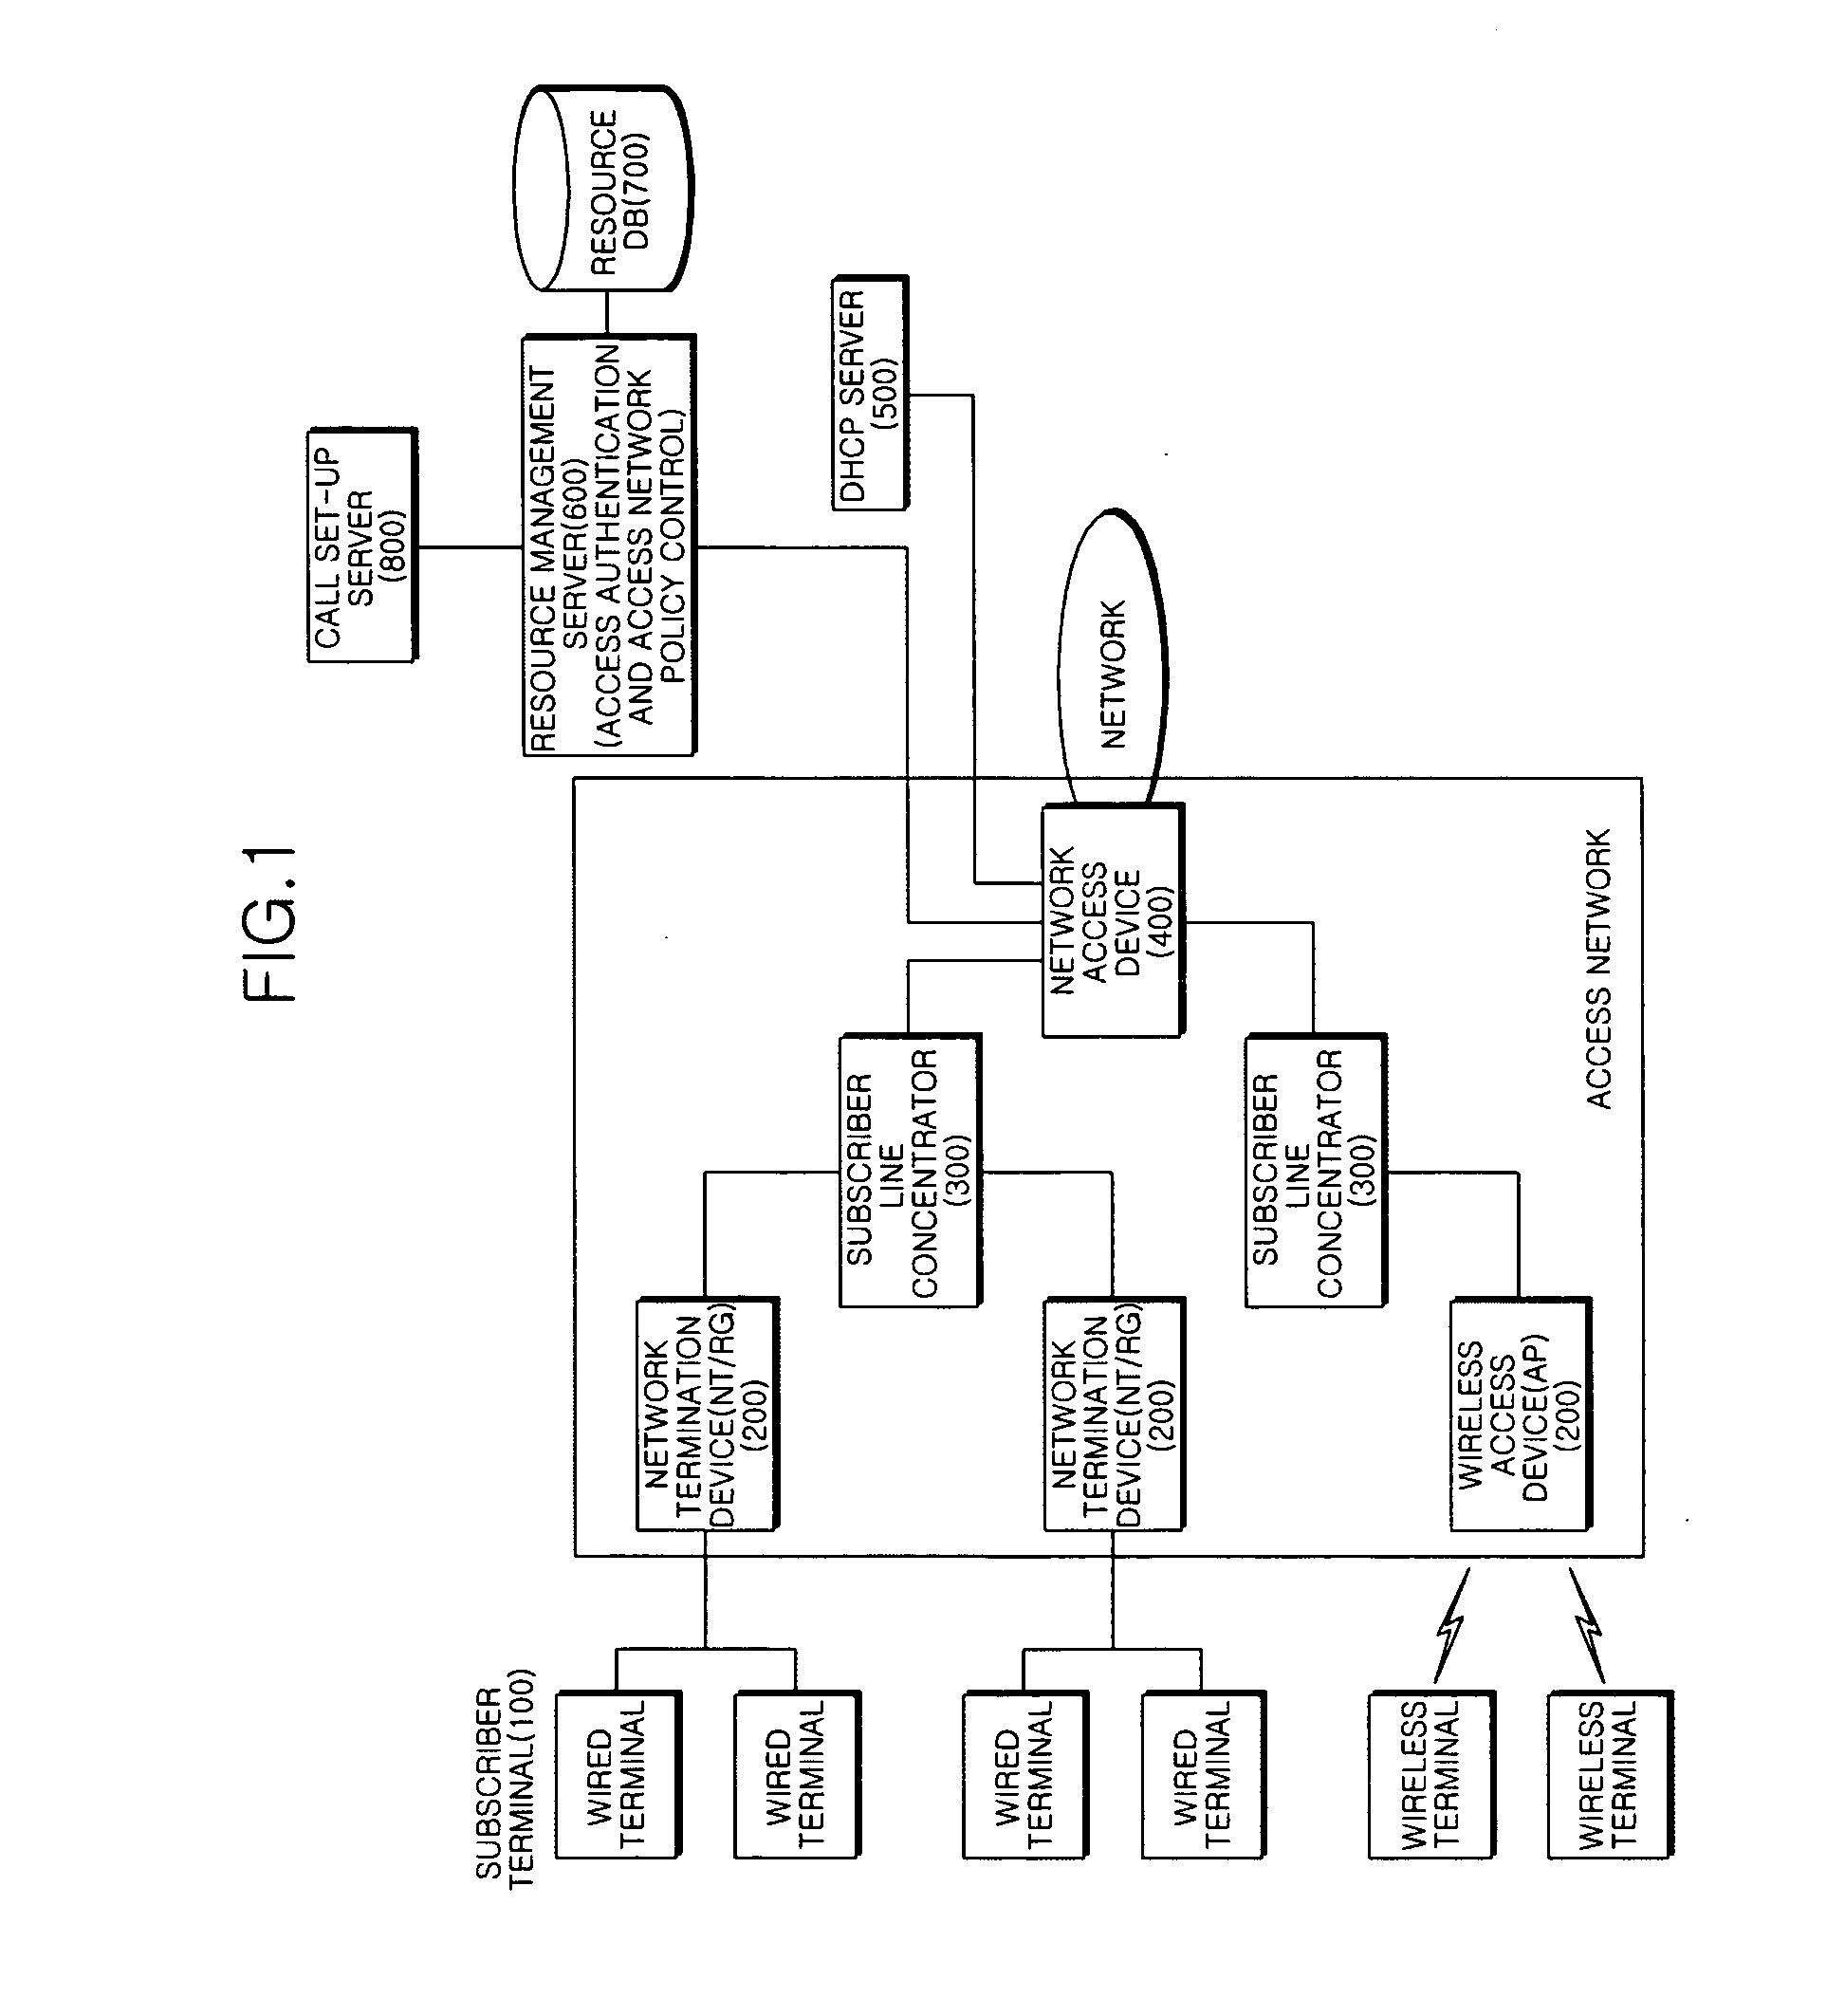 System and method for managing resources in access network